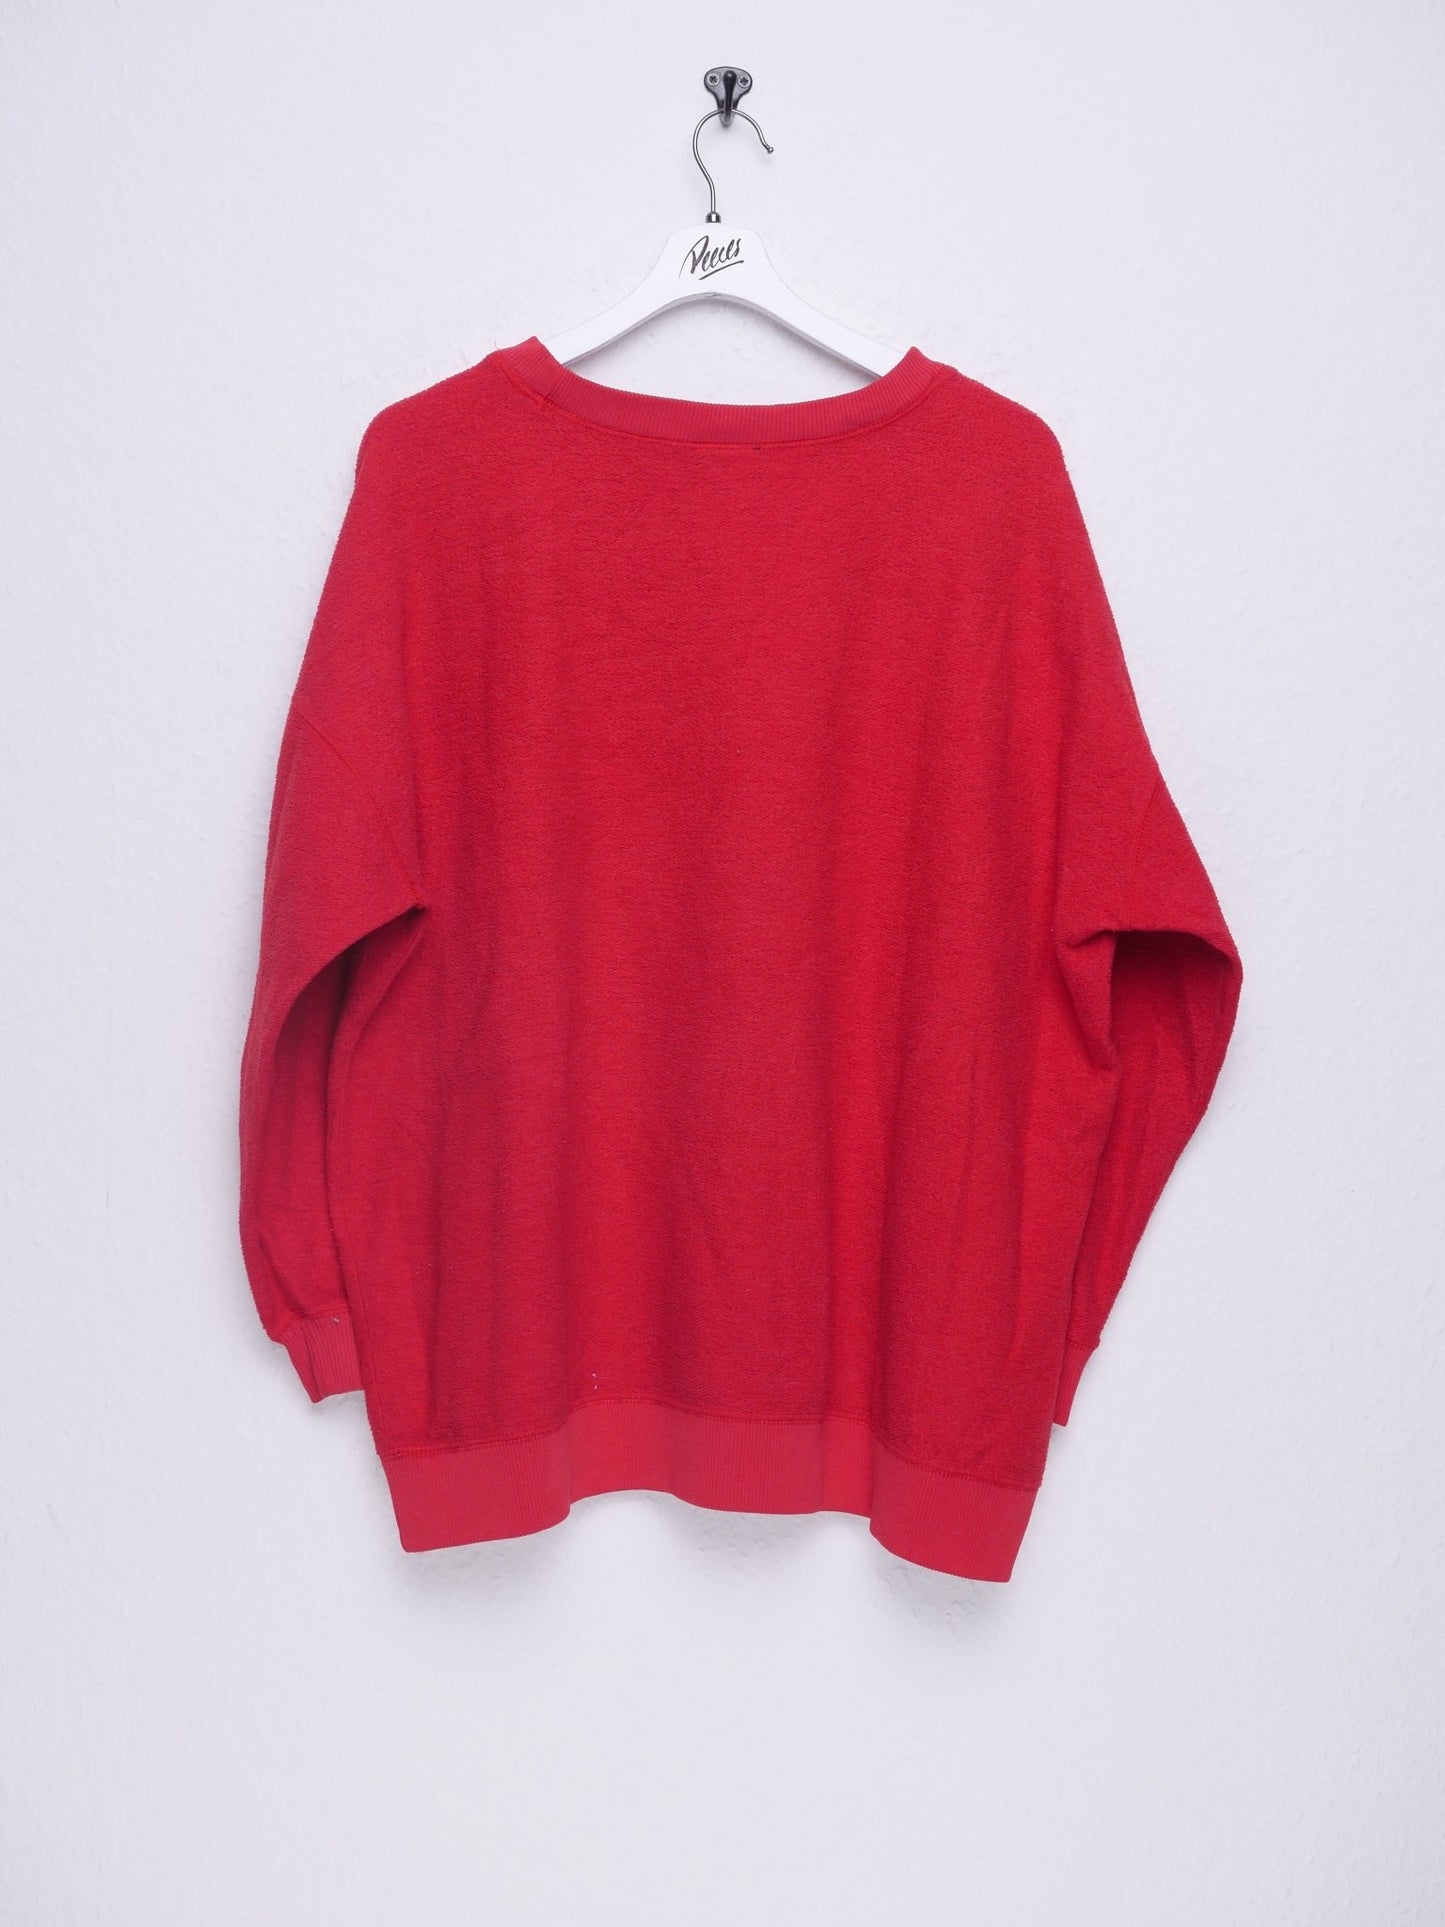 NY & CO 10001 embroidered Spellout red Sweater - Peeces